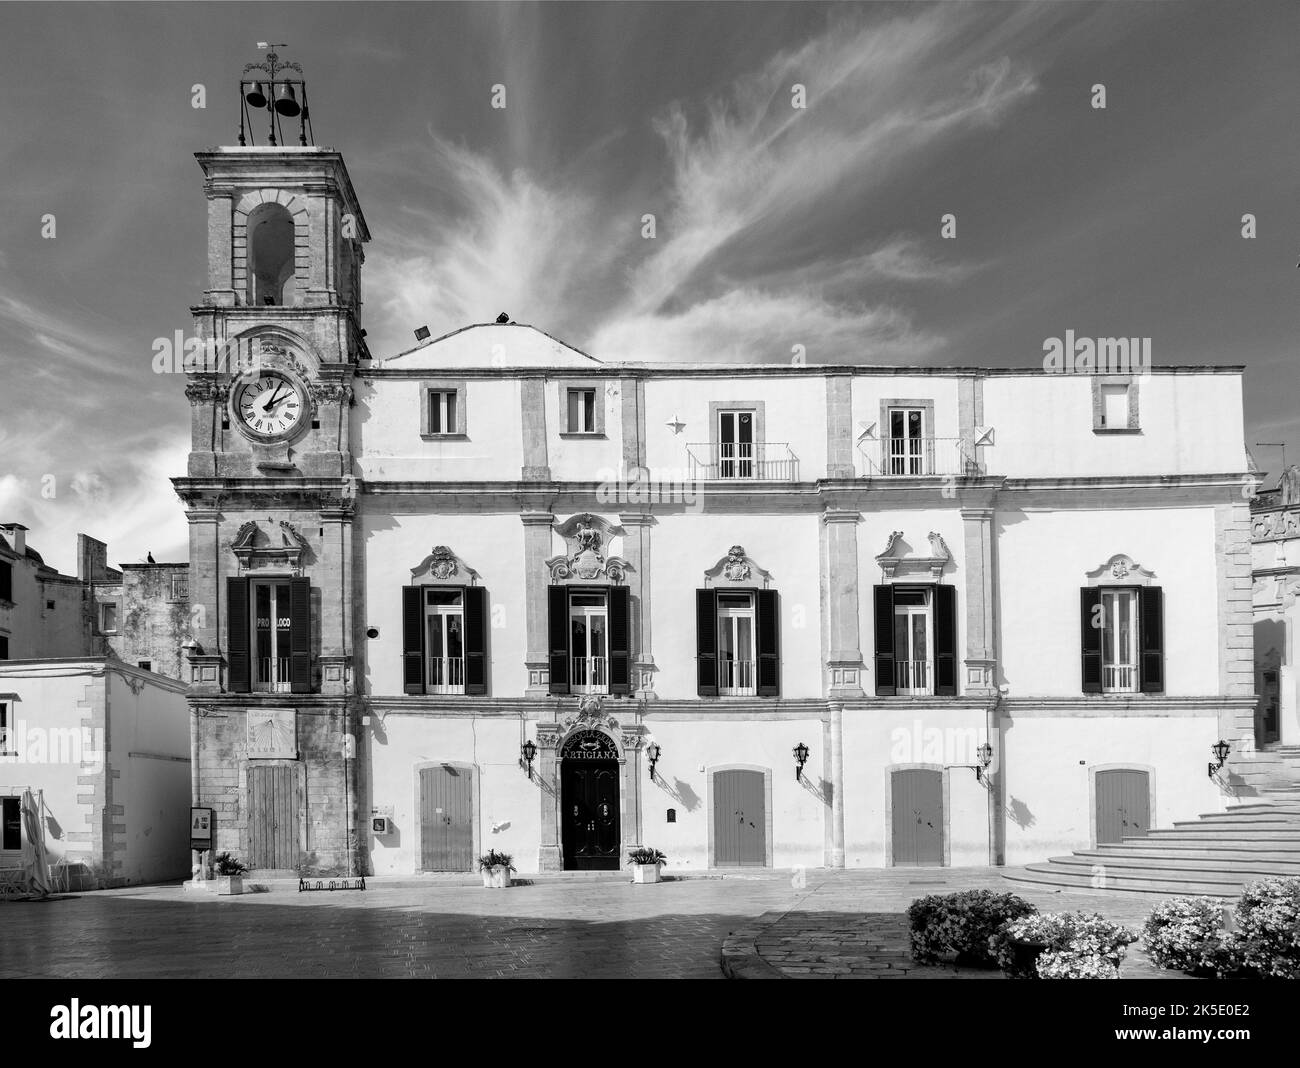 old university palace with clock tower at piazza plebiscito in Martina Franca, Italy Stock Photo